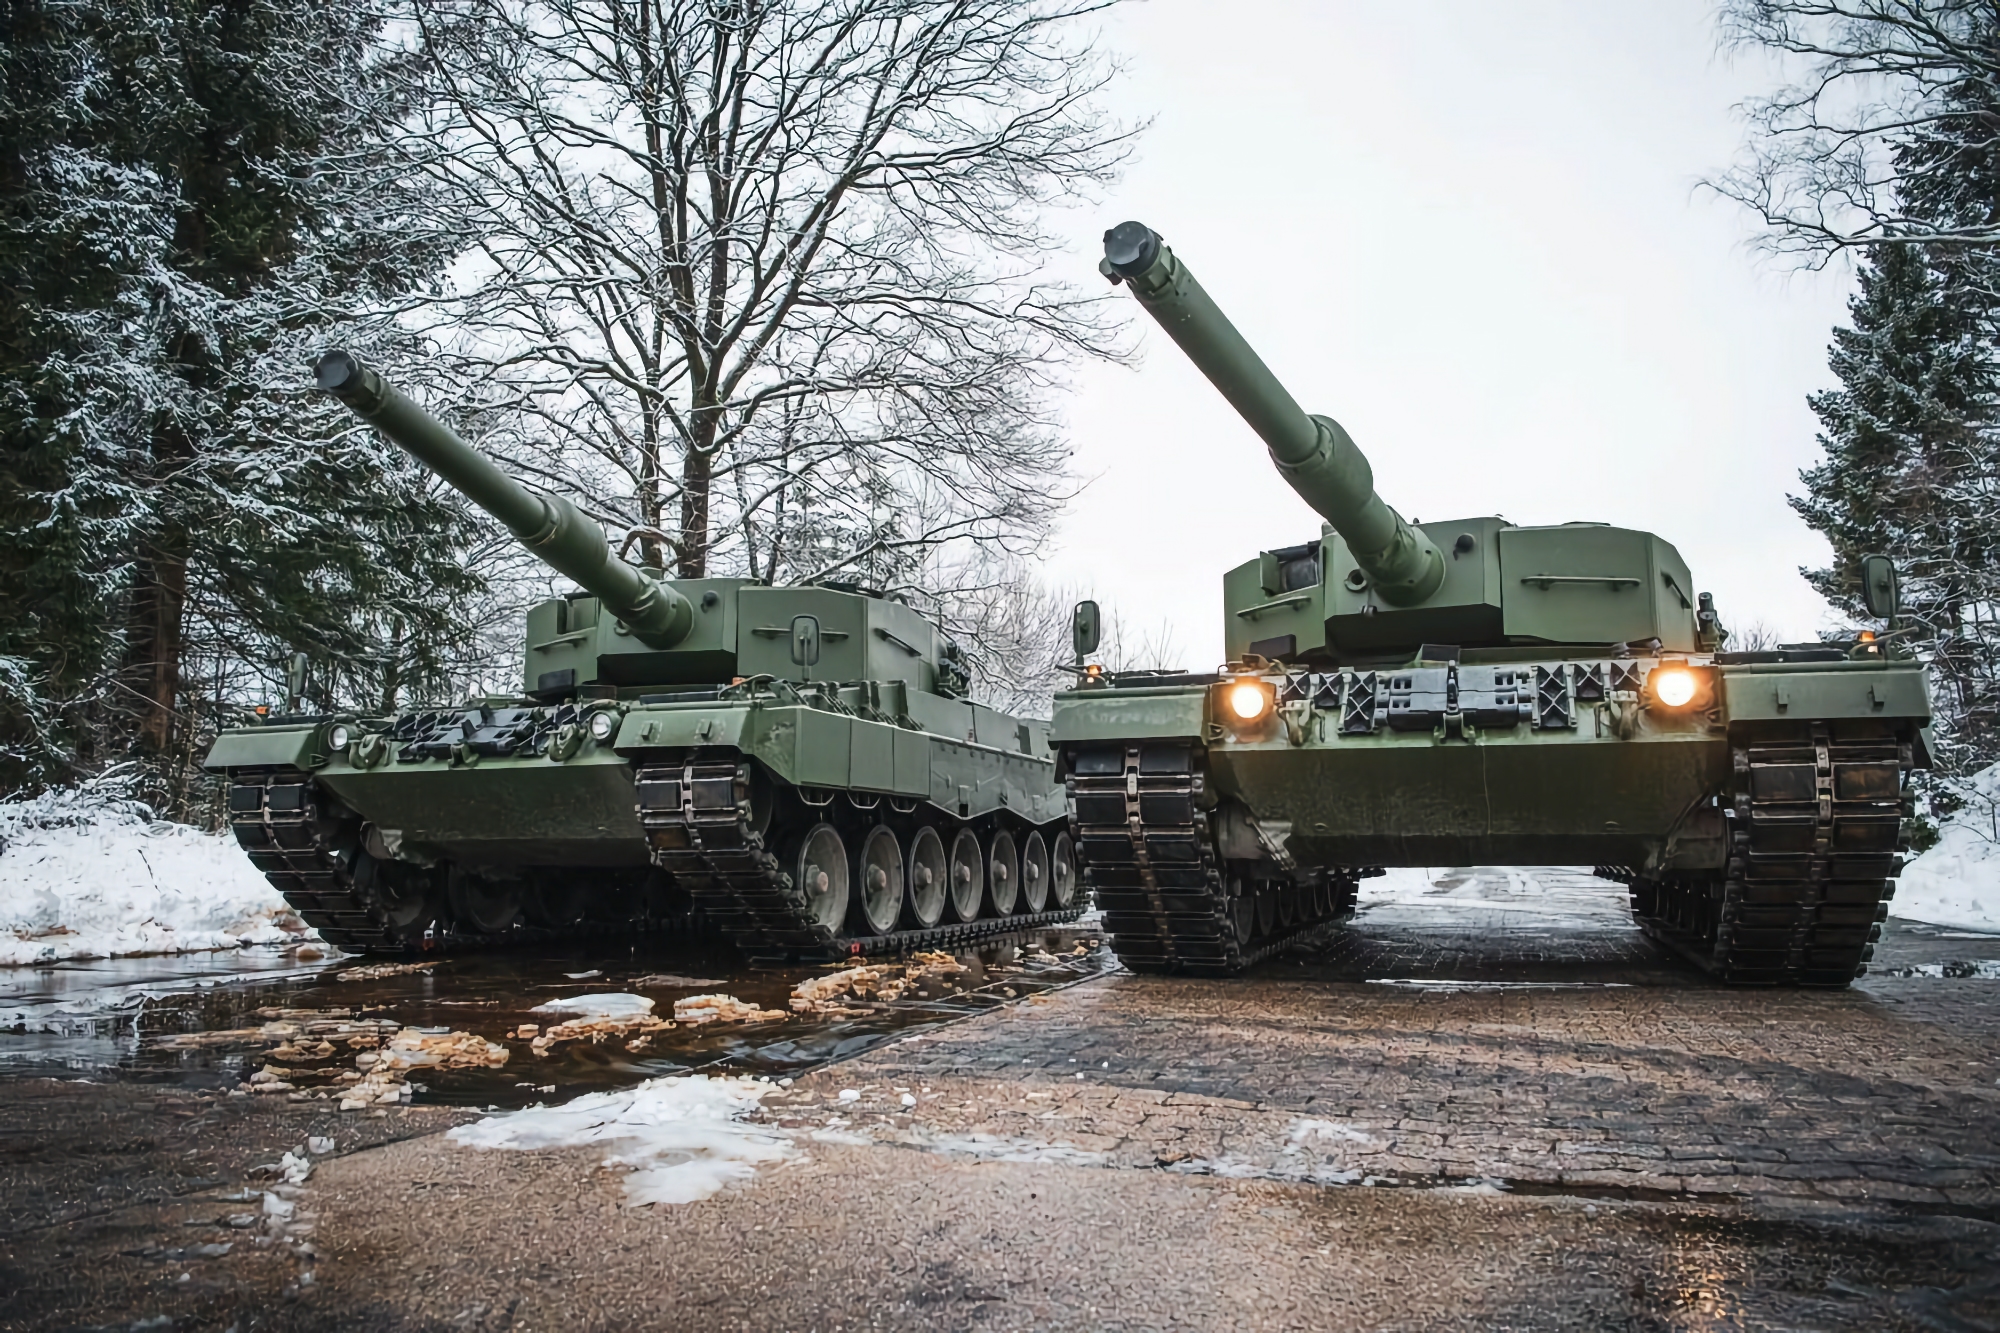 The Netherlands and Denmark will transfer 14 Leopard 2A4 tanks to Ukraine by the end of summer